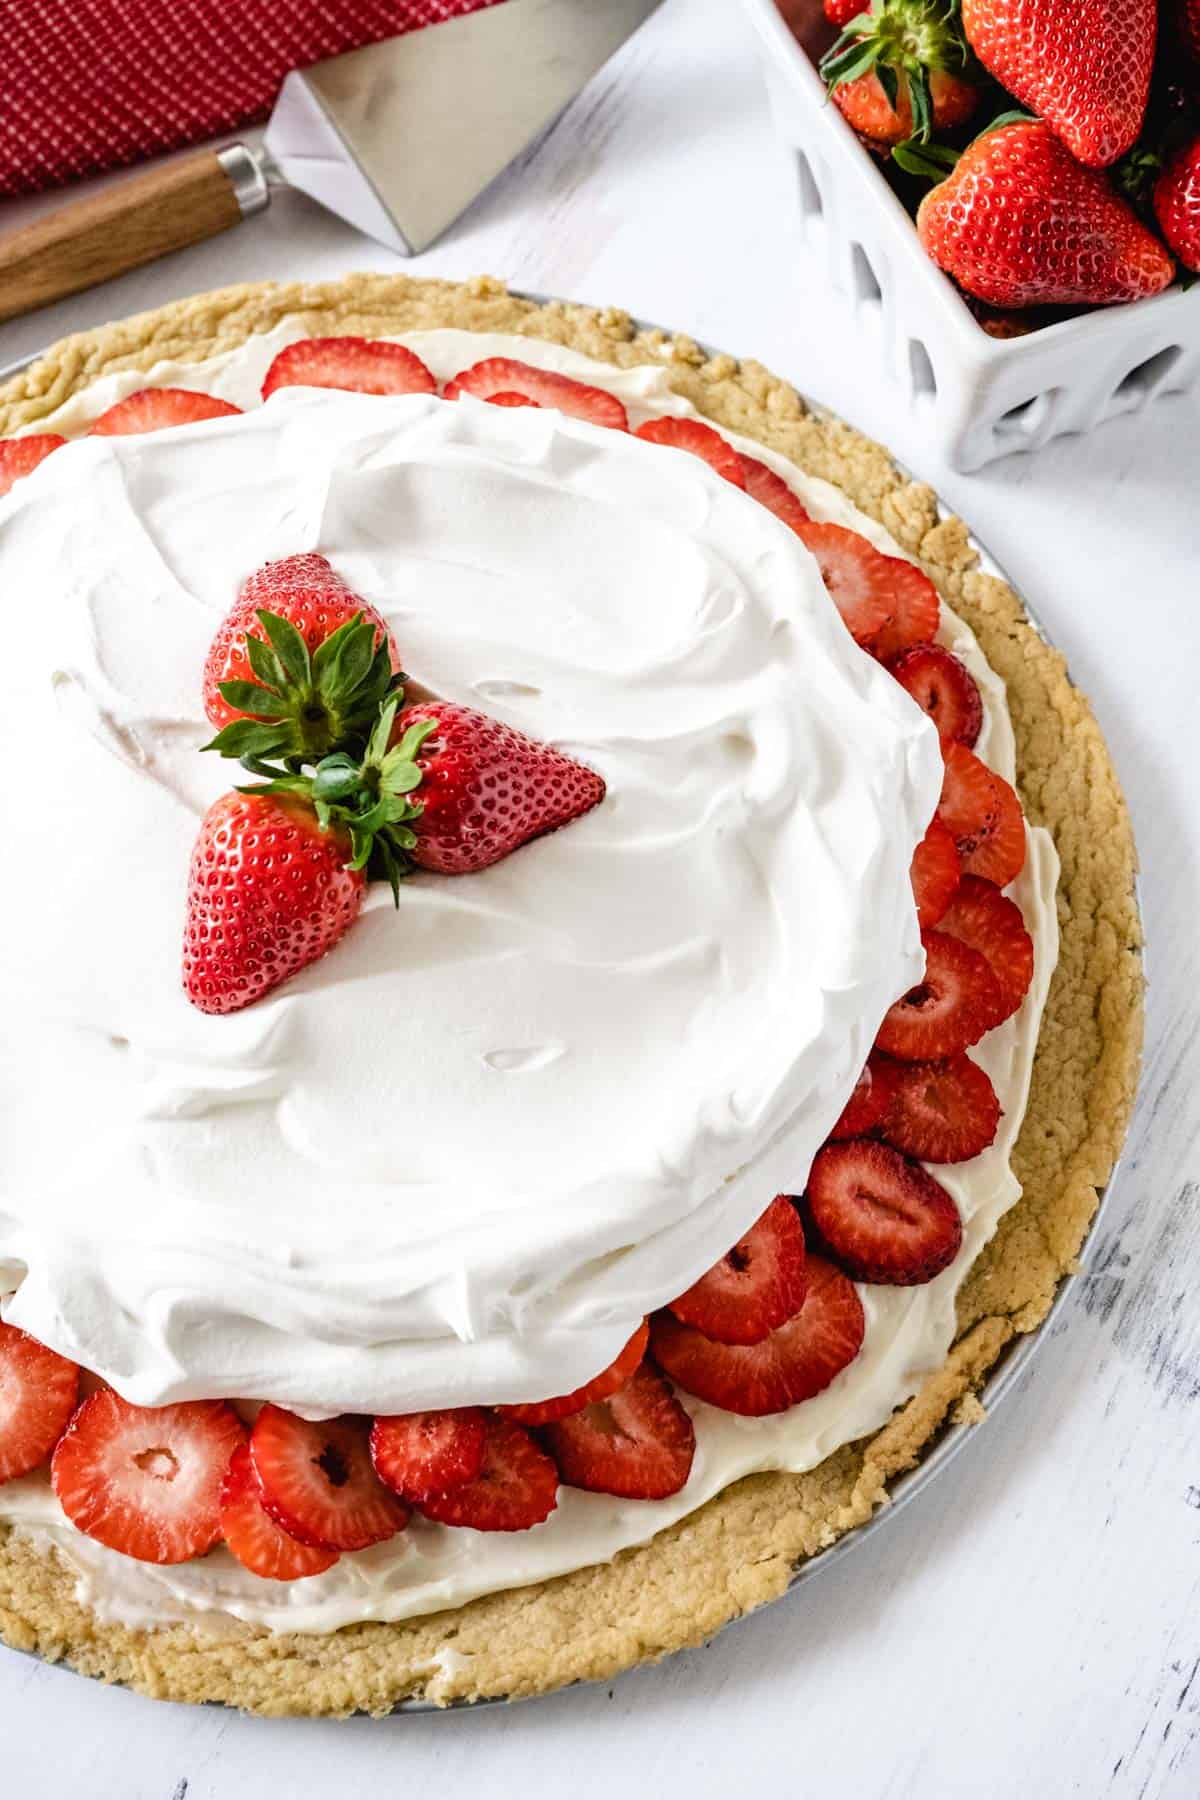 Up close image showing the layers of a whole strawberry dessert pizza garnished with three whole strawberries.